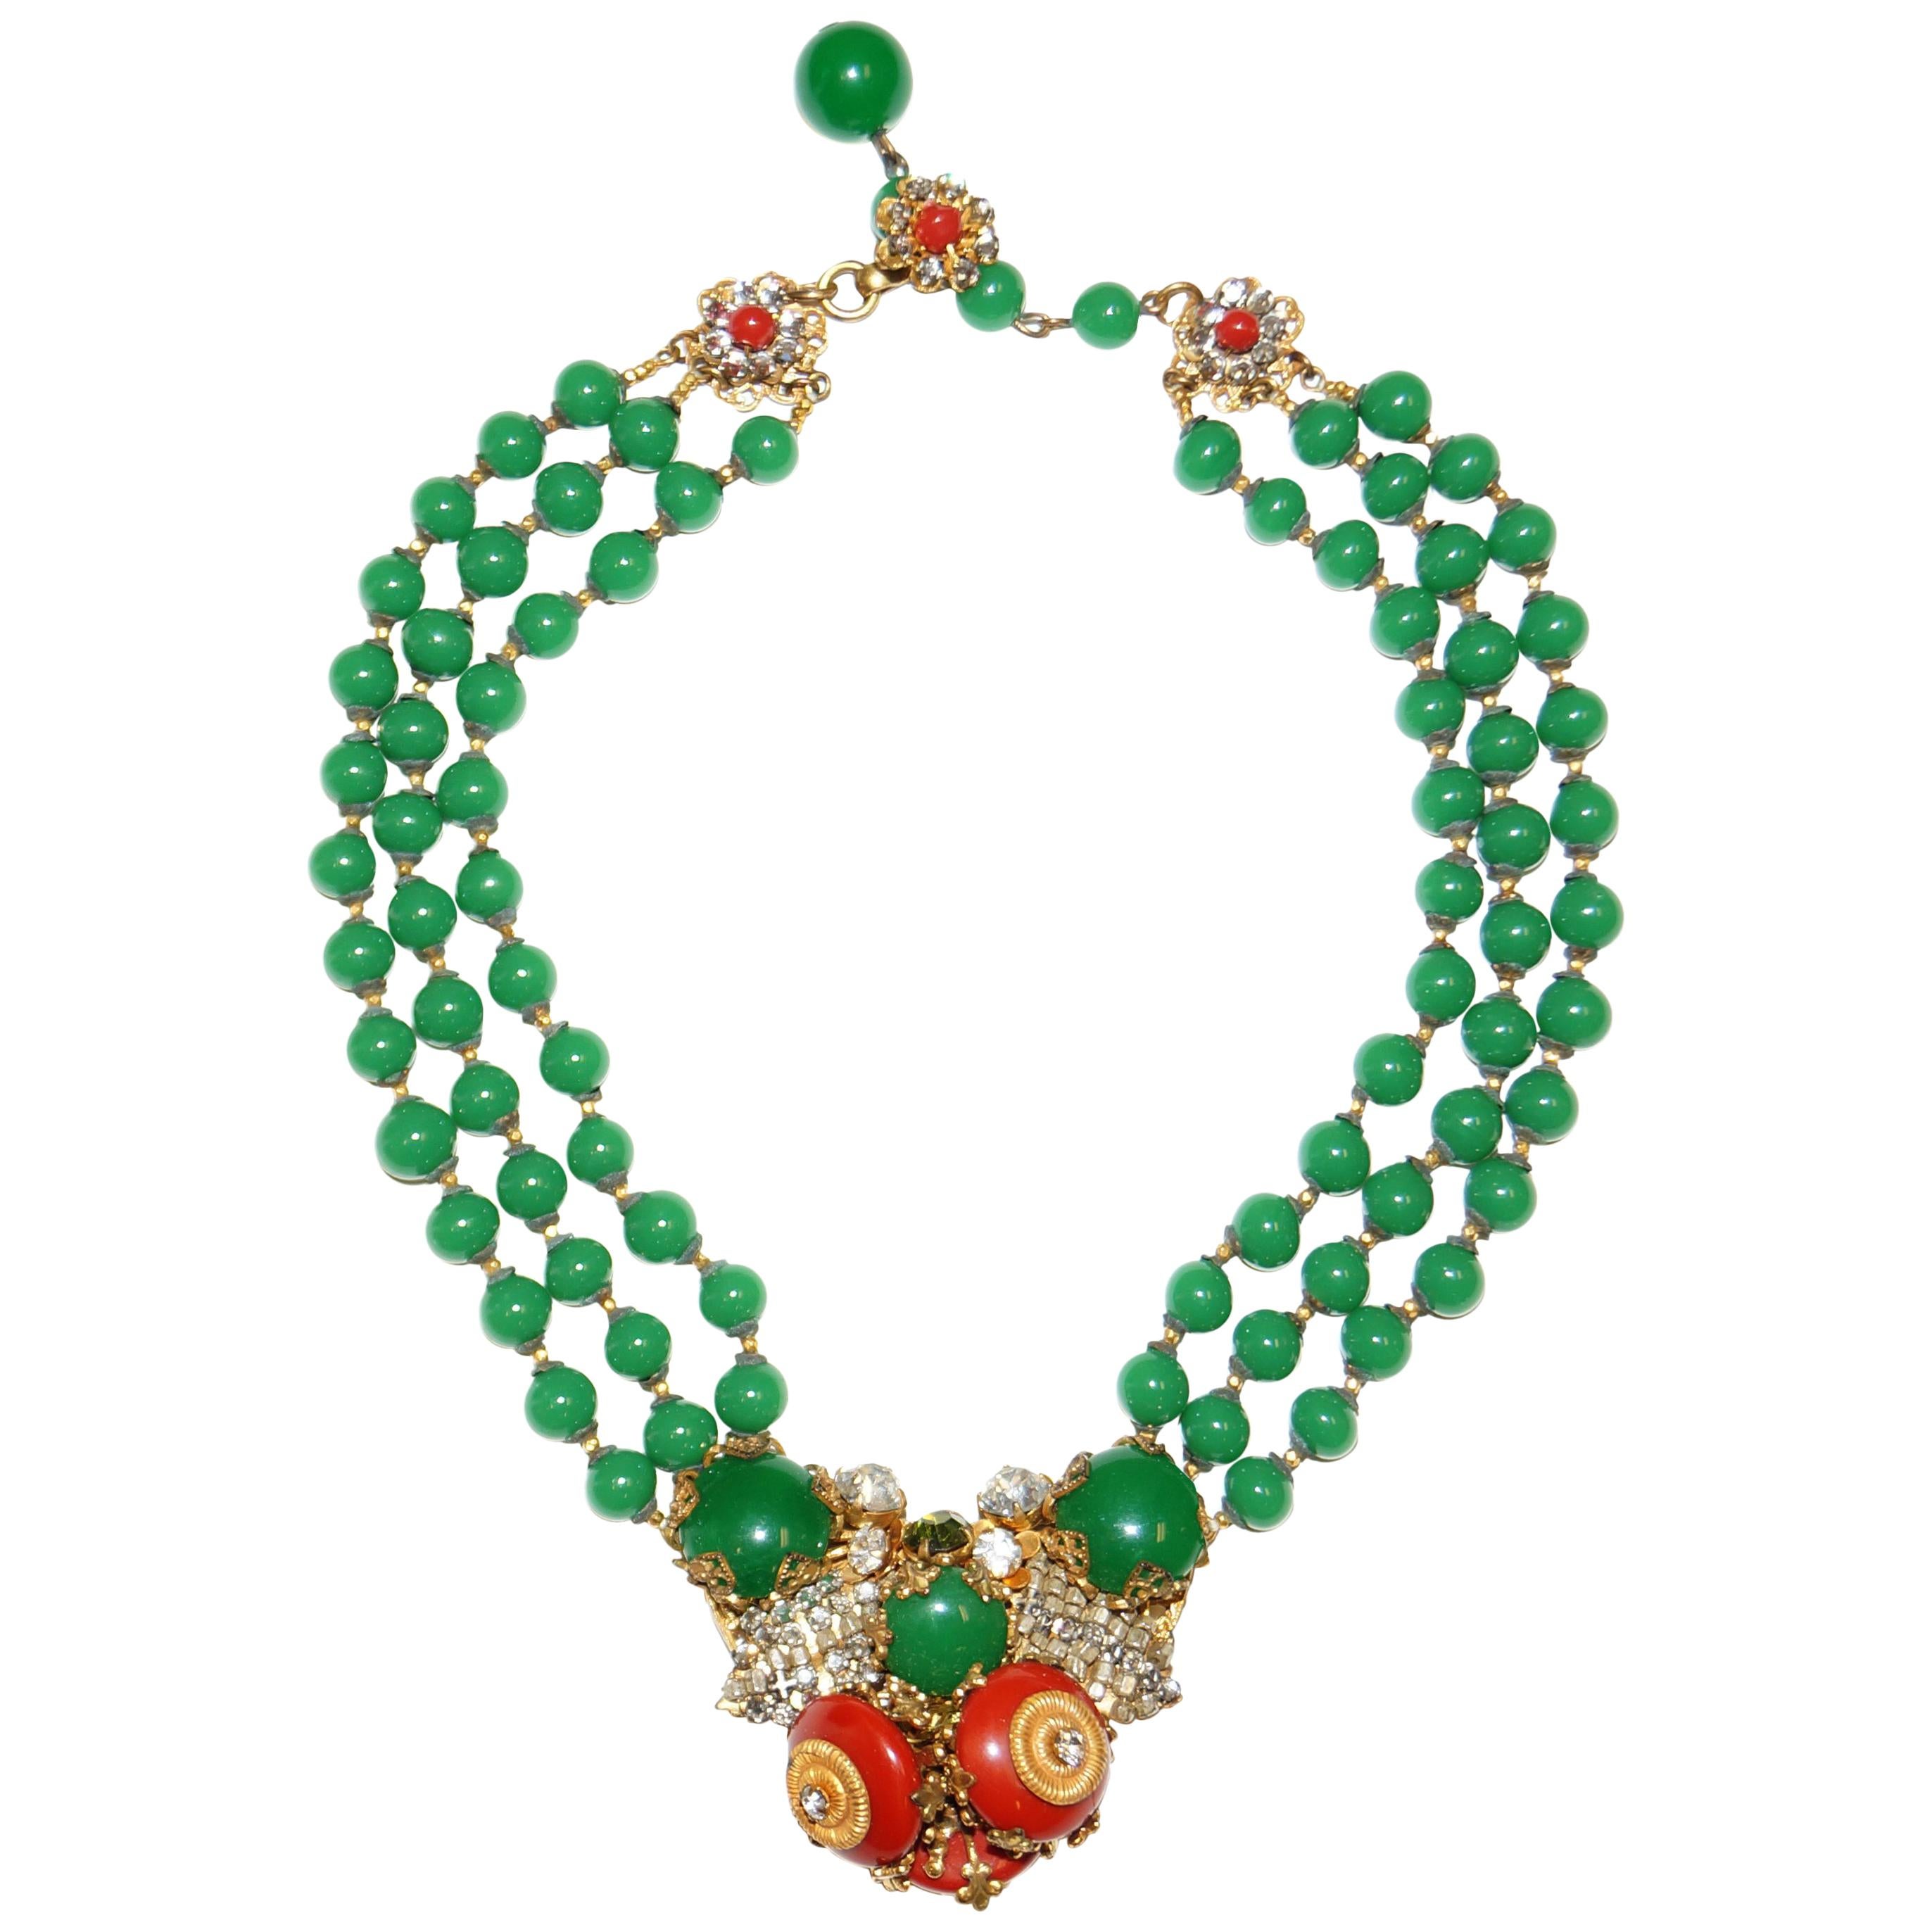 1950s Miriam Haskell Green and Umber Glass and Rhinestone Floral Choker